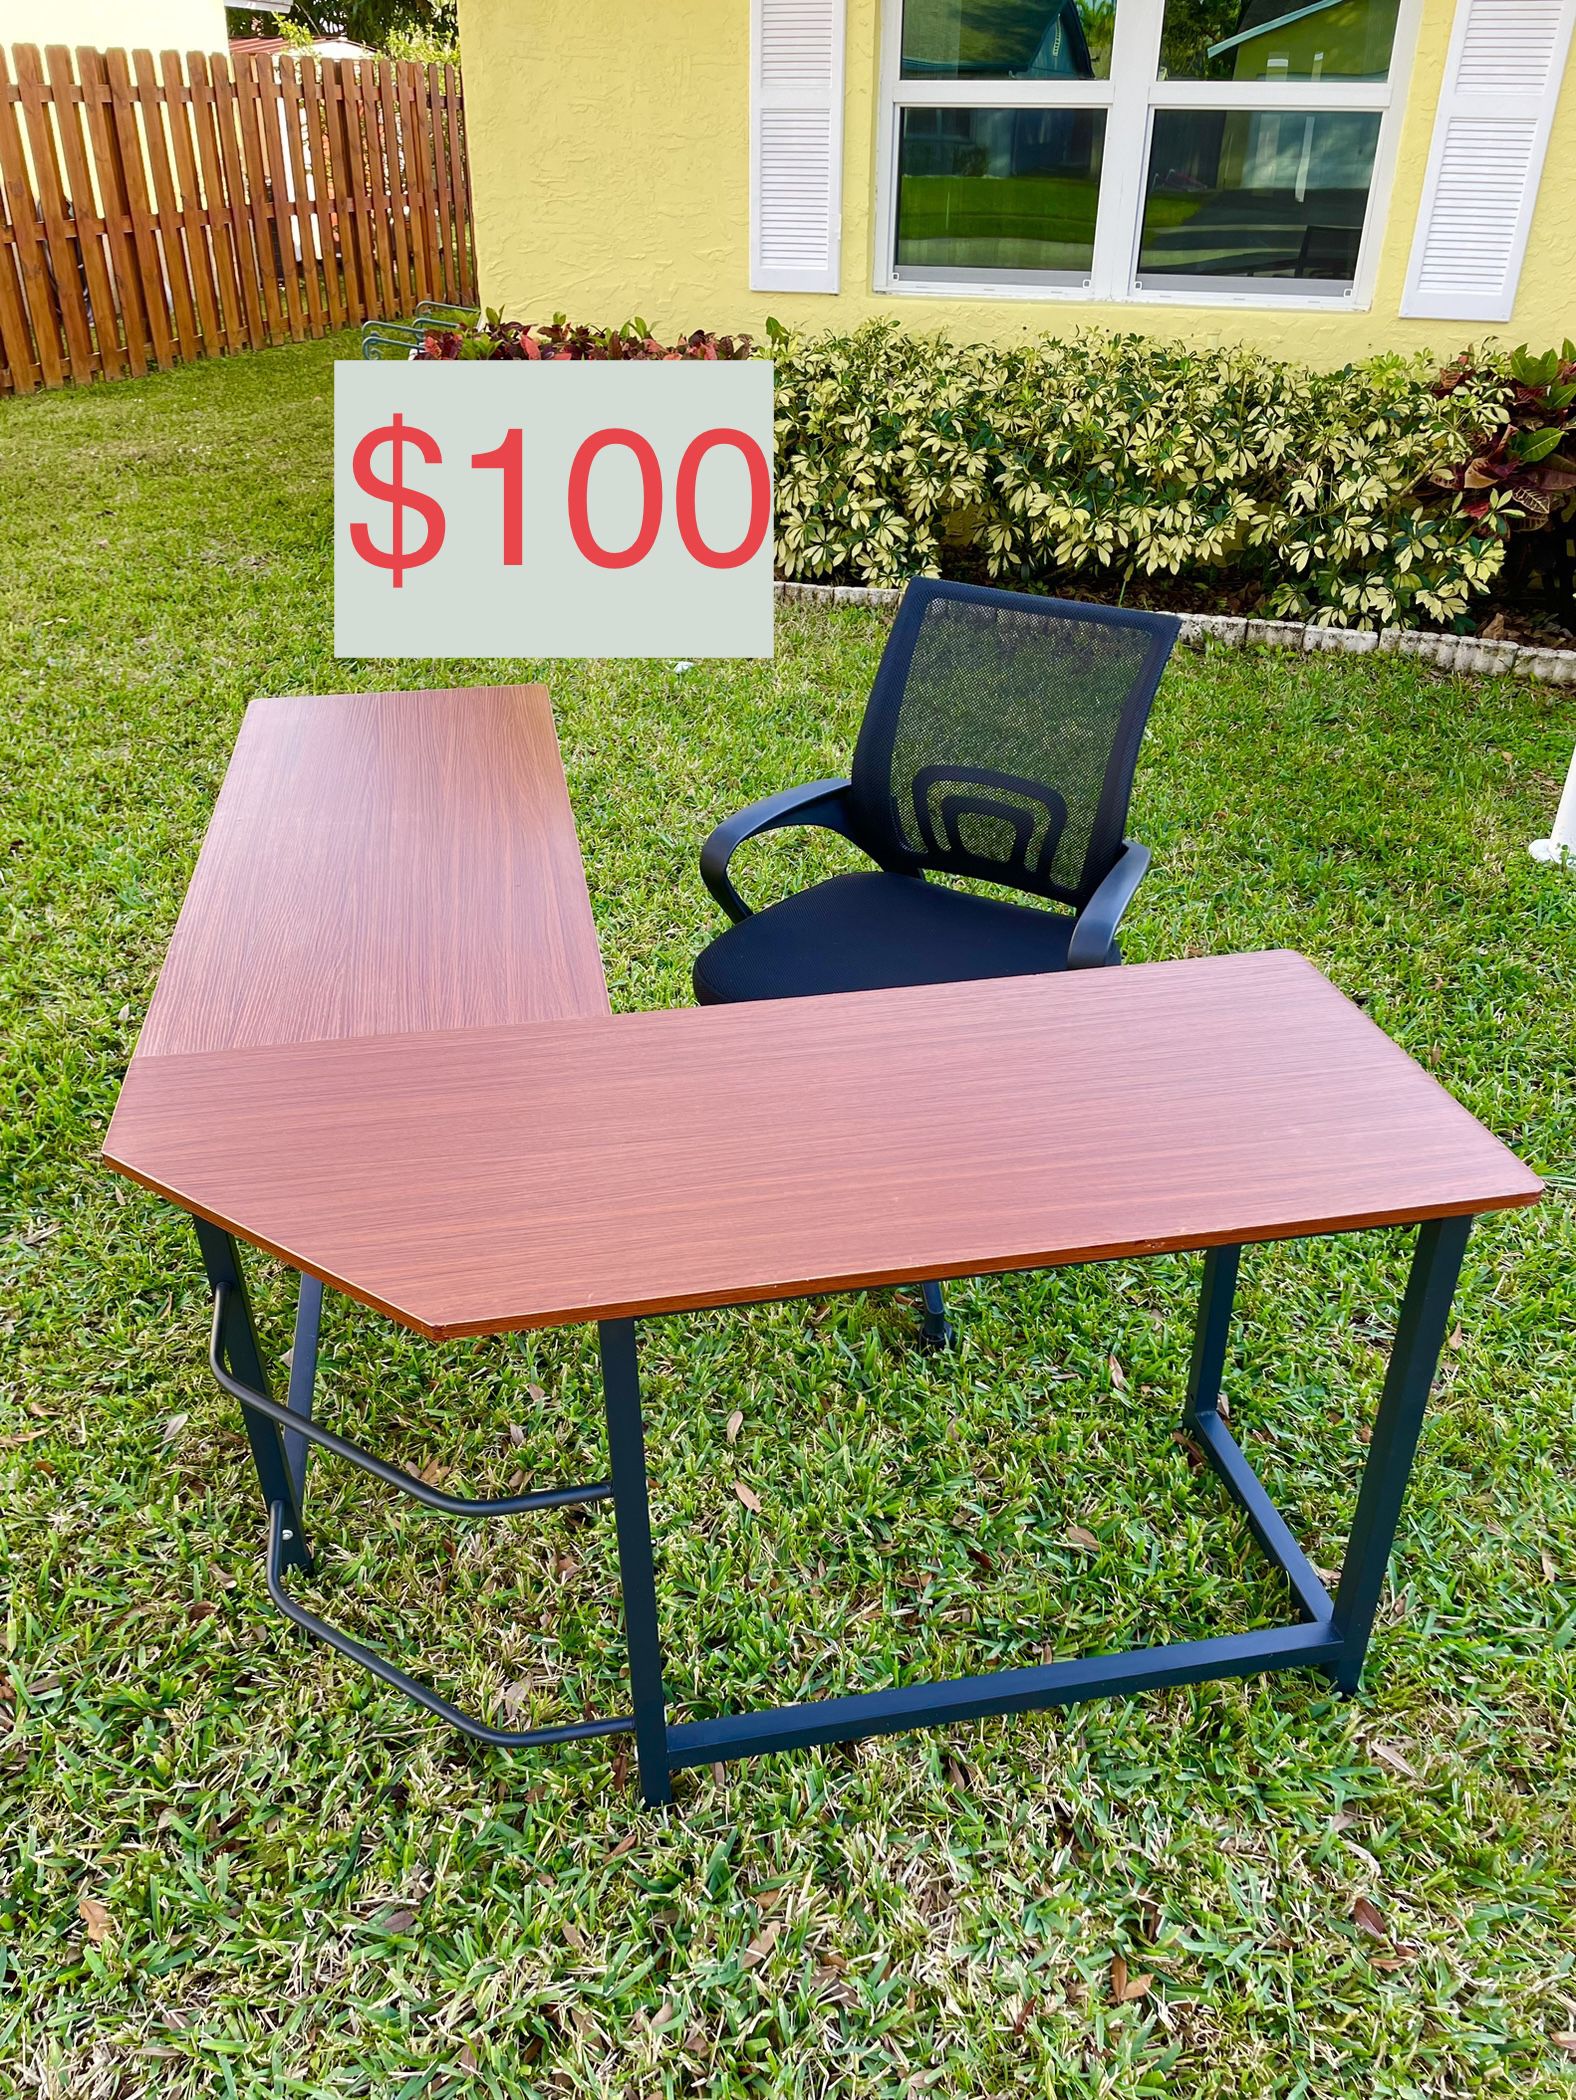 Super Nice L-Shaped Corner Desk With Hydraulic Chair Included. Excellent Condition! Sold As A Set Only!